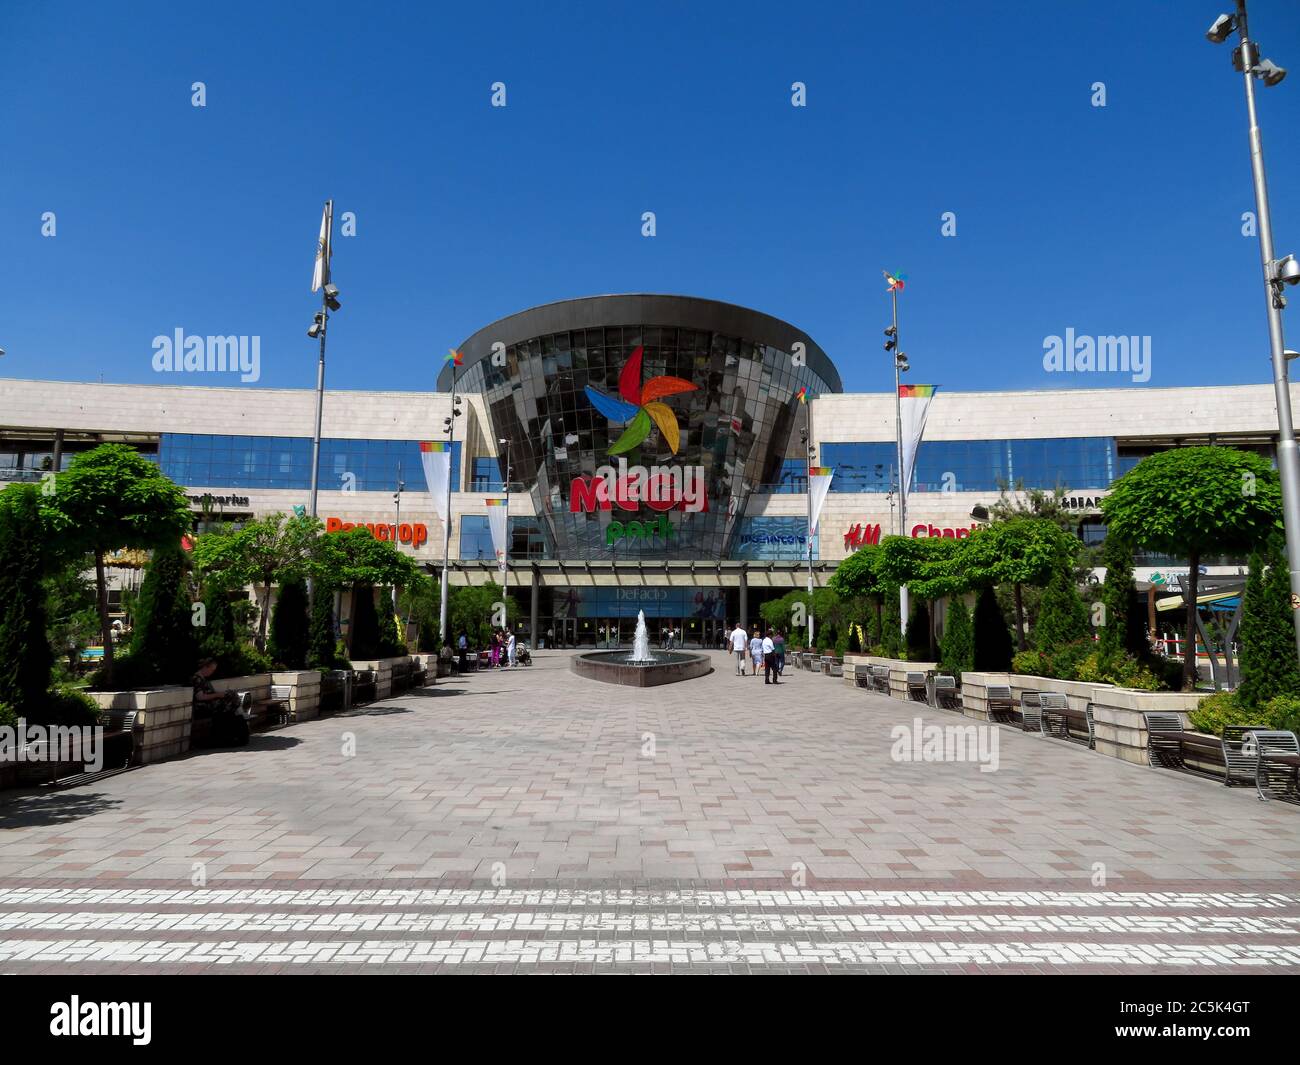 ALMATY, KAZAKHSTAN - June 15, 2019: Shopping and entertainment center Mega Park in Almaty, Kazakhstan. Opened in 2015, it is the largest department st Stock Photo